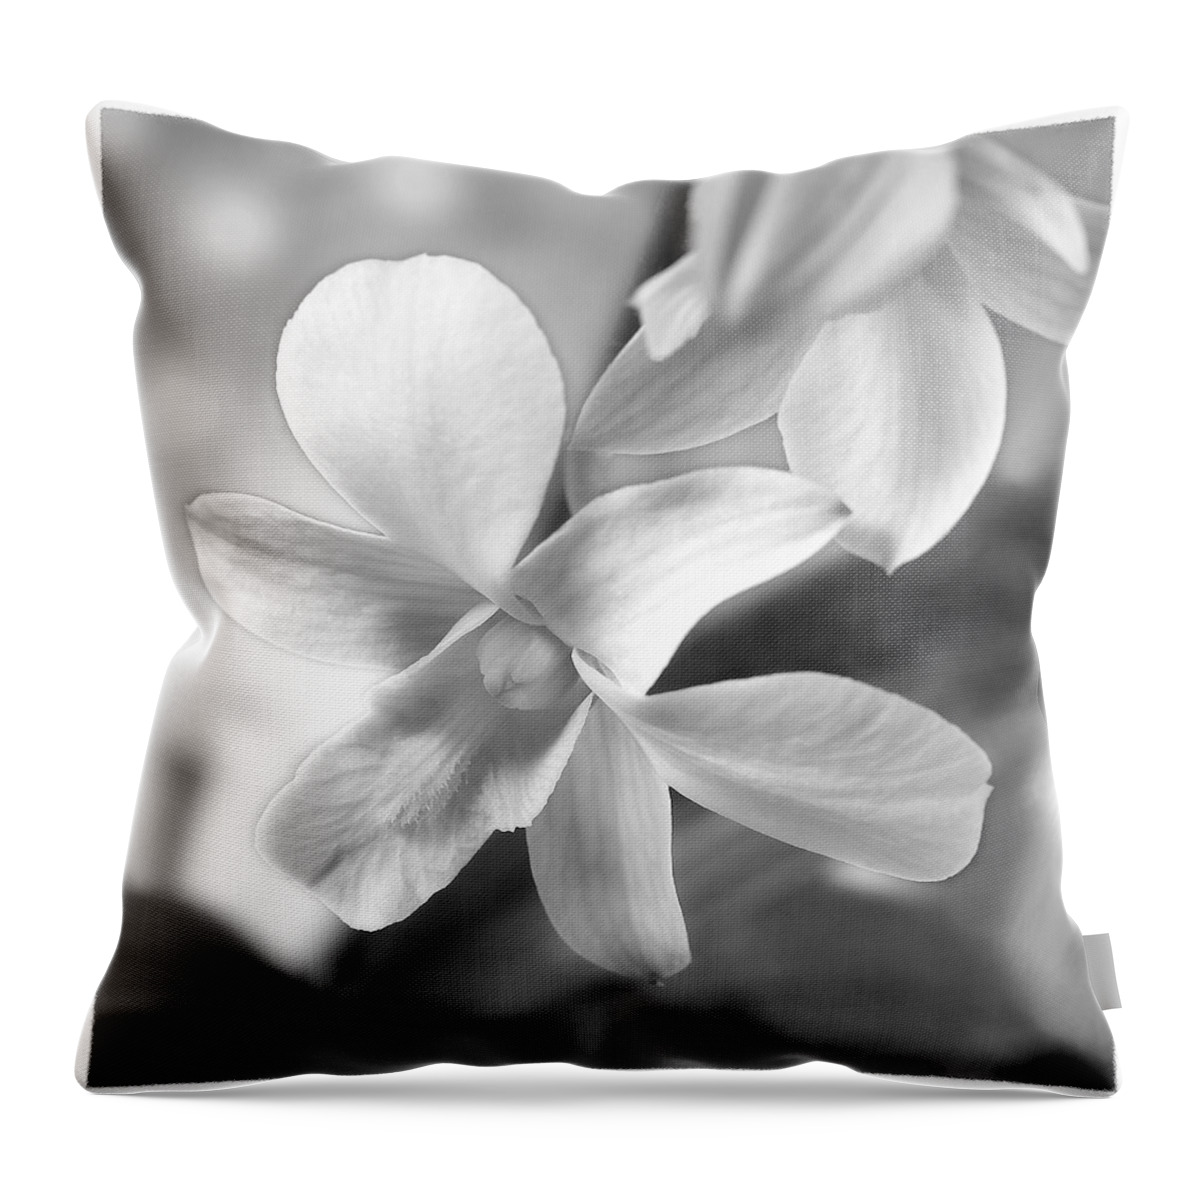 White Orchid Throw Pillow featuring the photograph White Orchid #2 by Mike McGlothlen